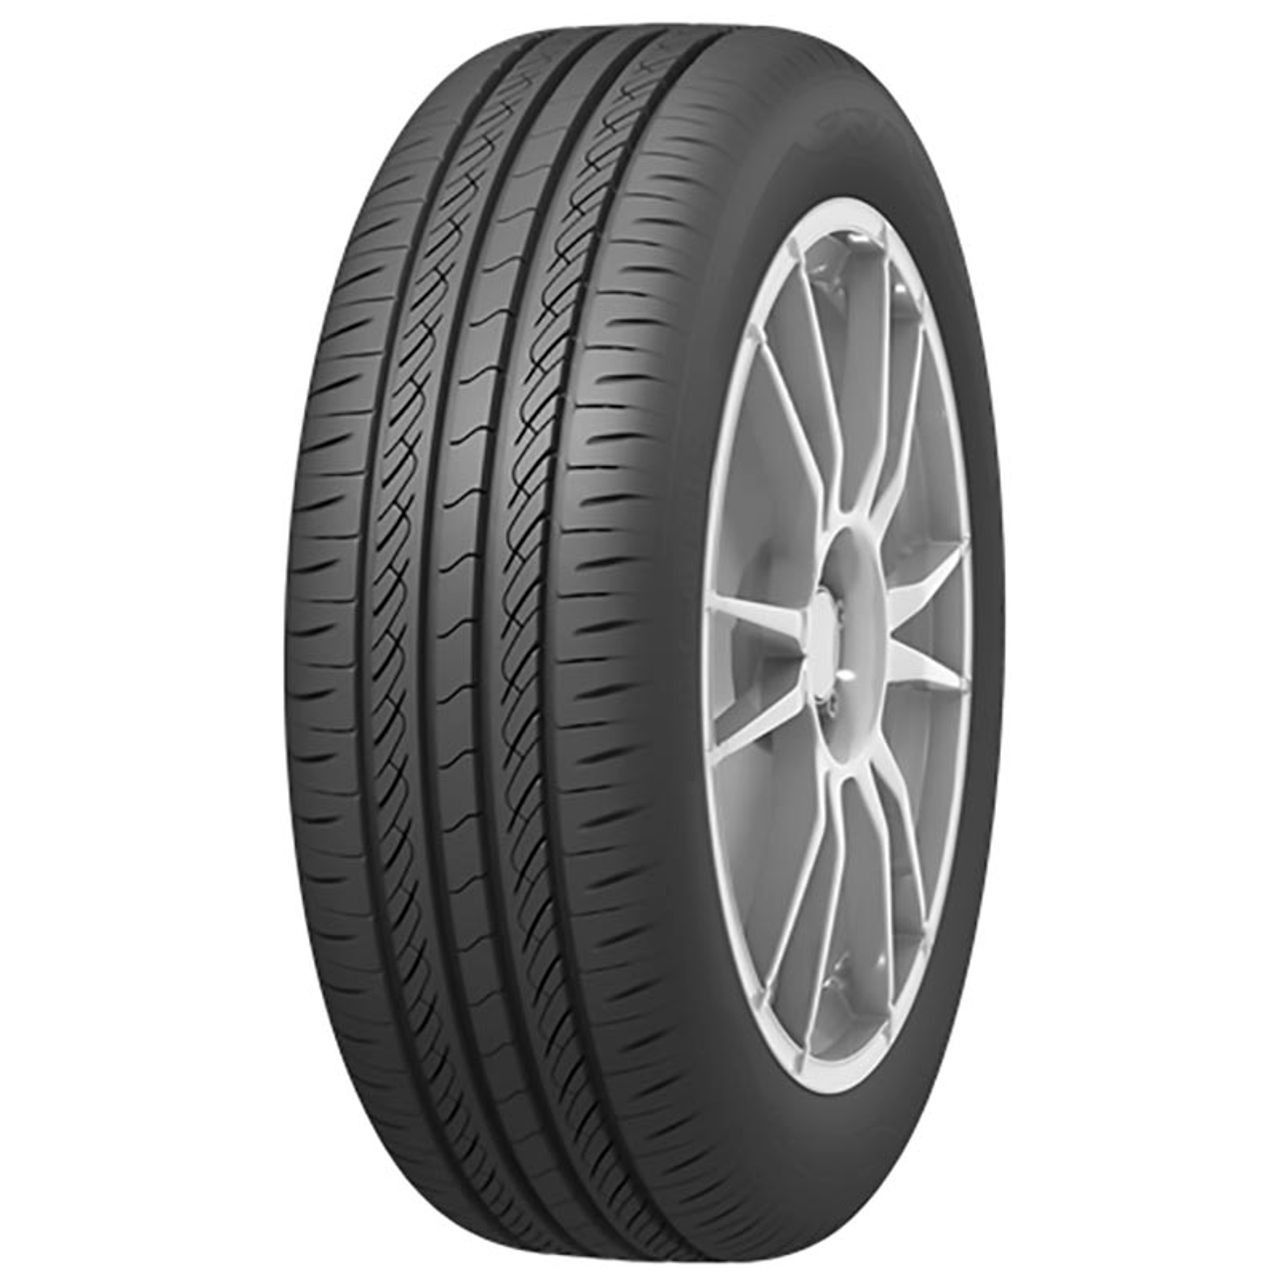 INFINITY ECOSIS 195/65R15 95T BSW XL